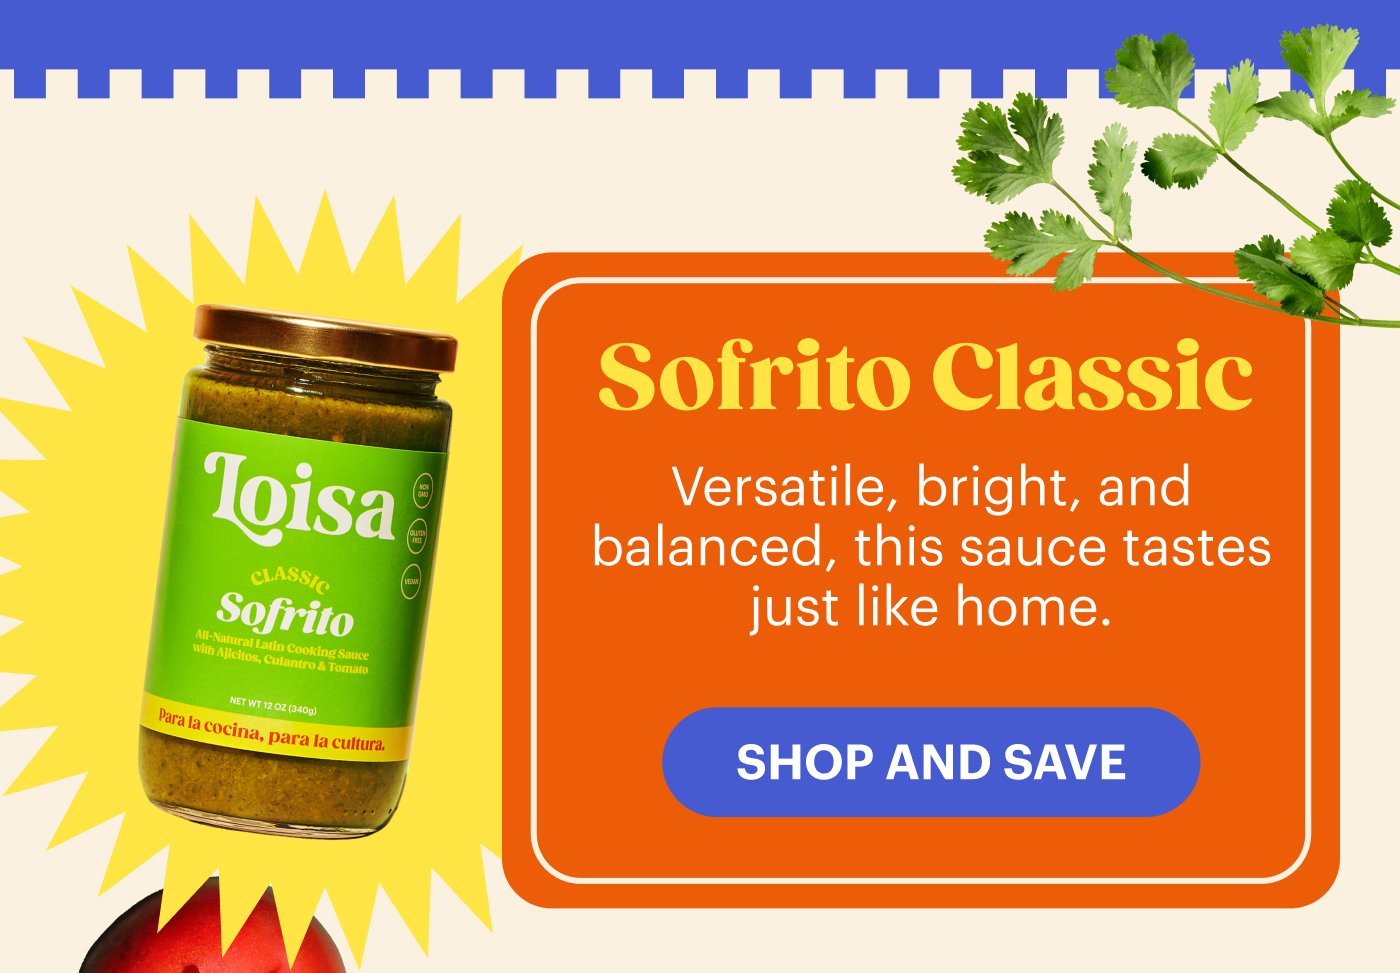 Sofrito Classic SHOP AND SAVE